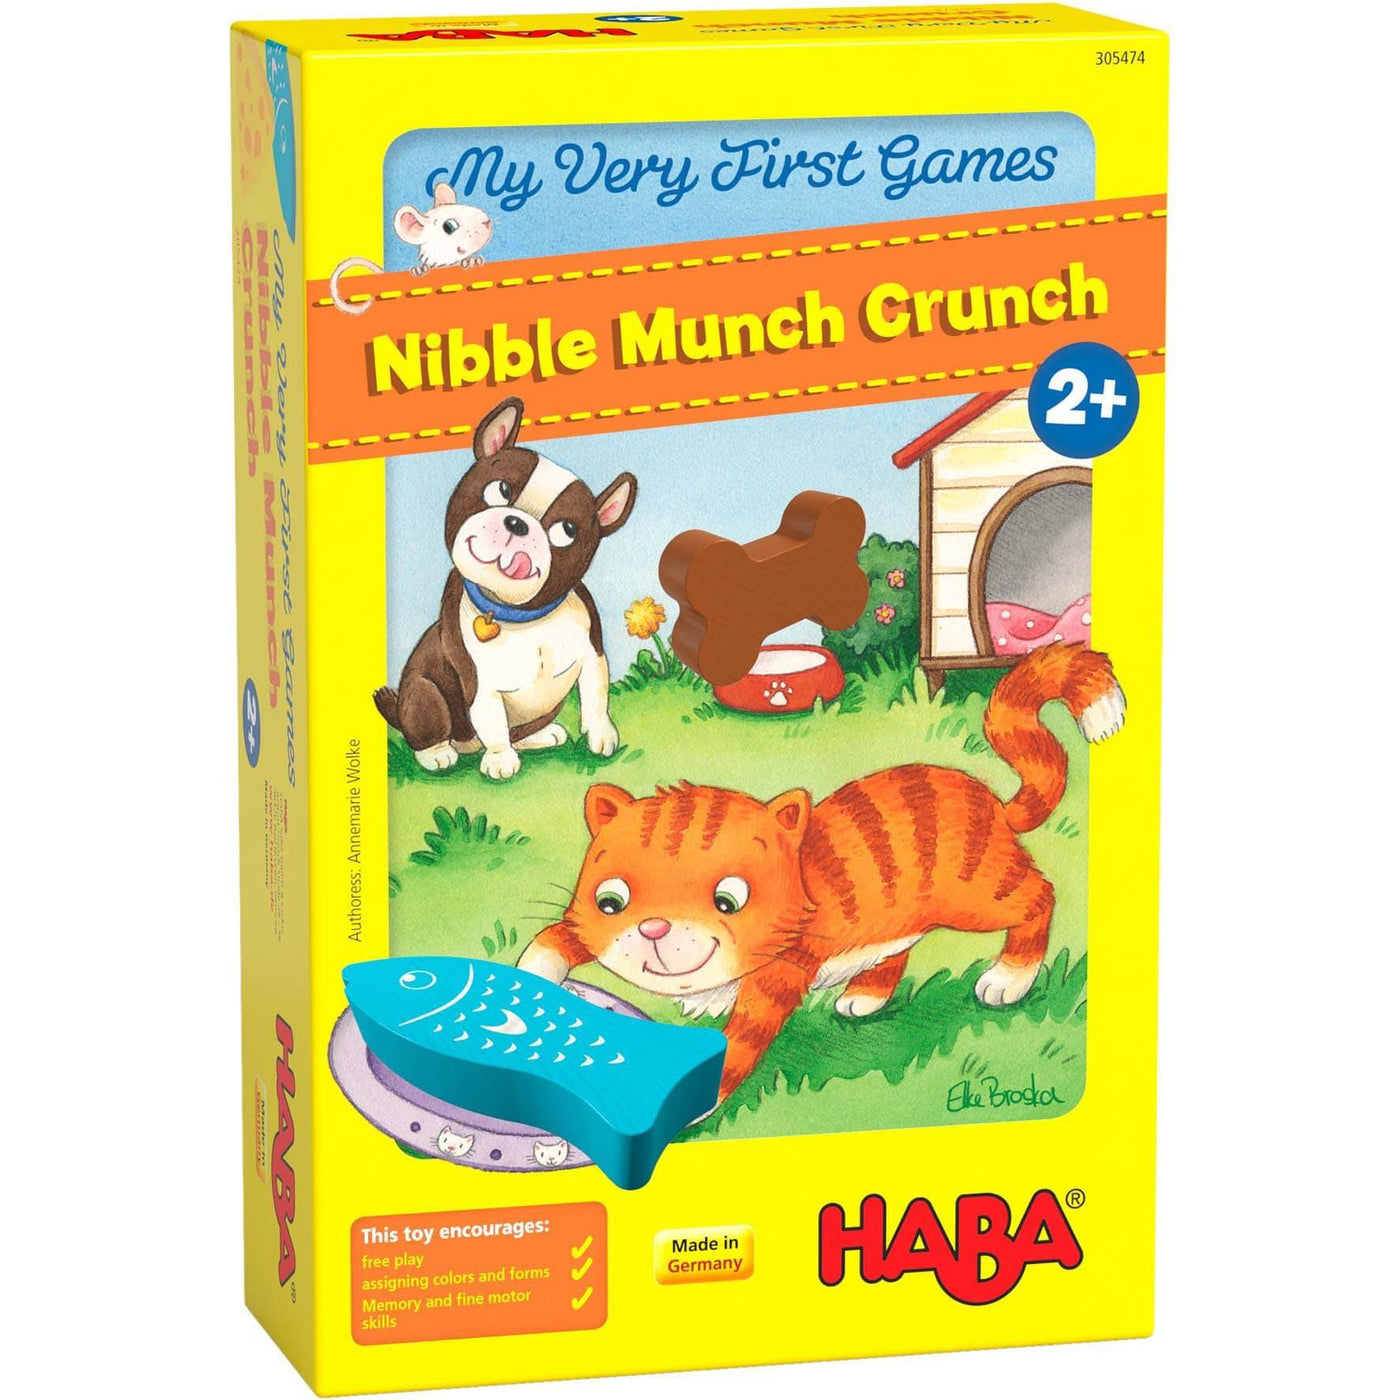 My Very First Games - Nibble Munch Crunch - HABA USA